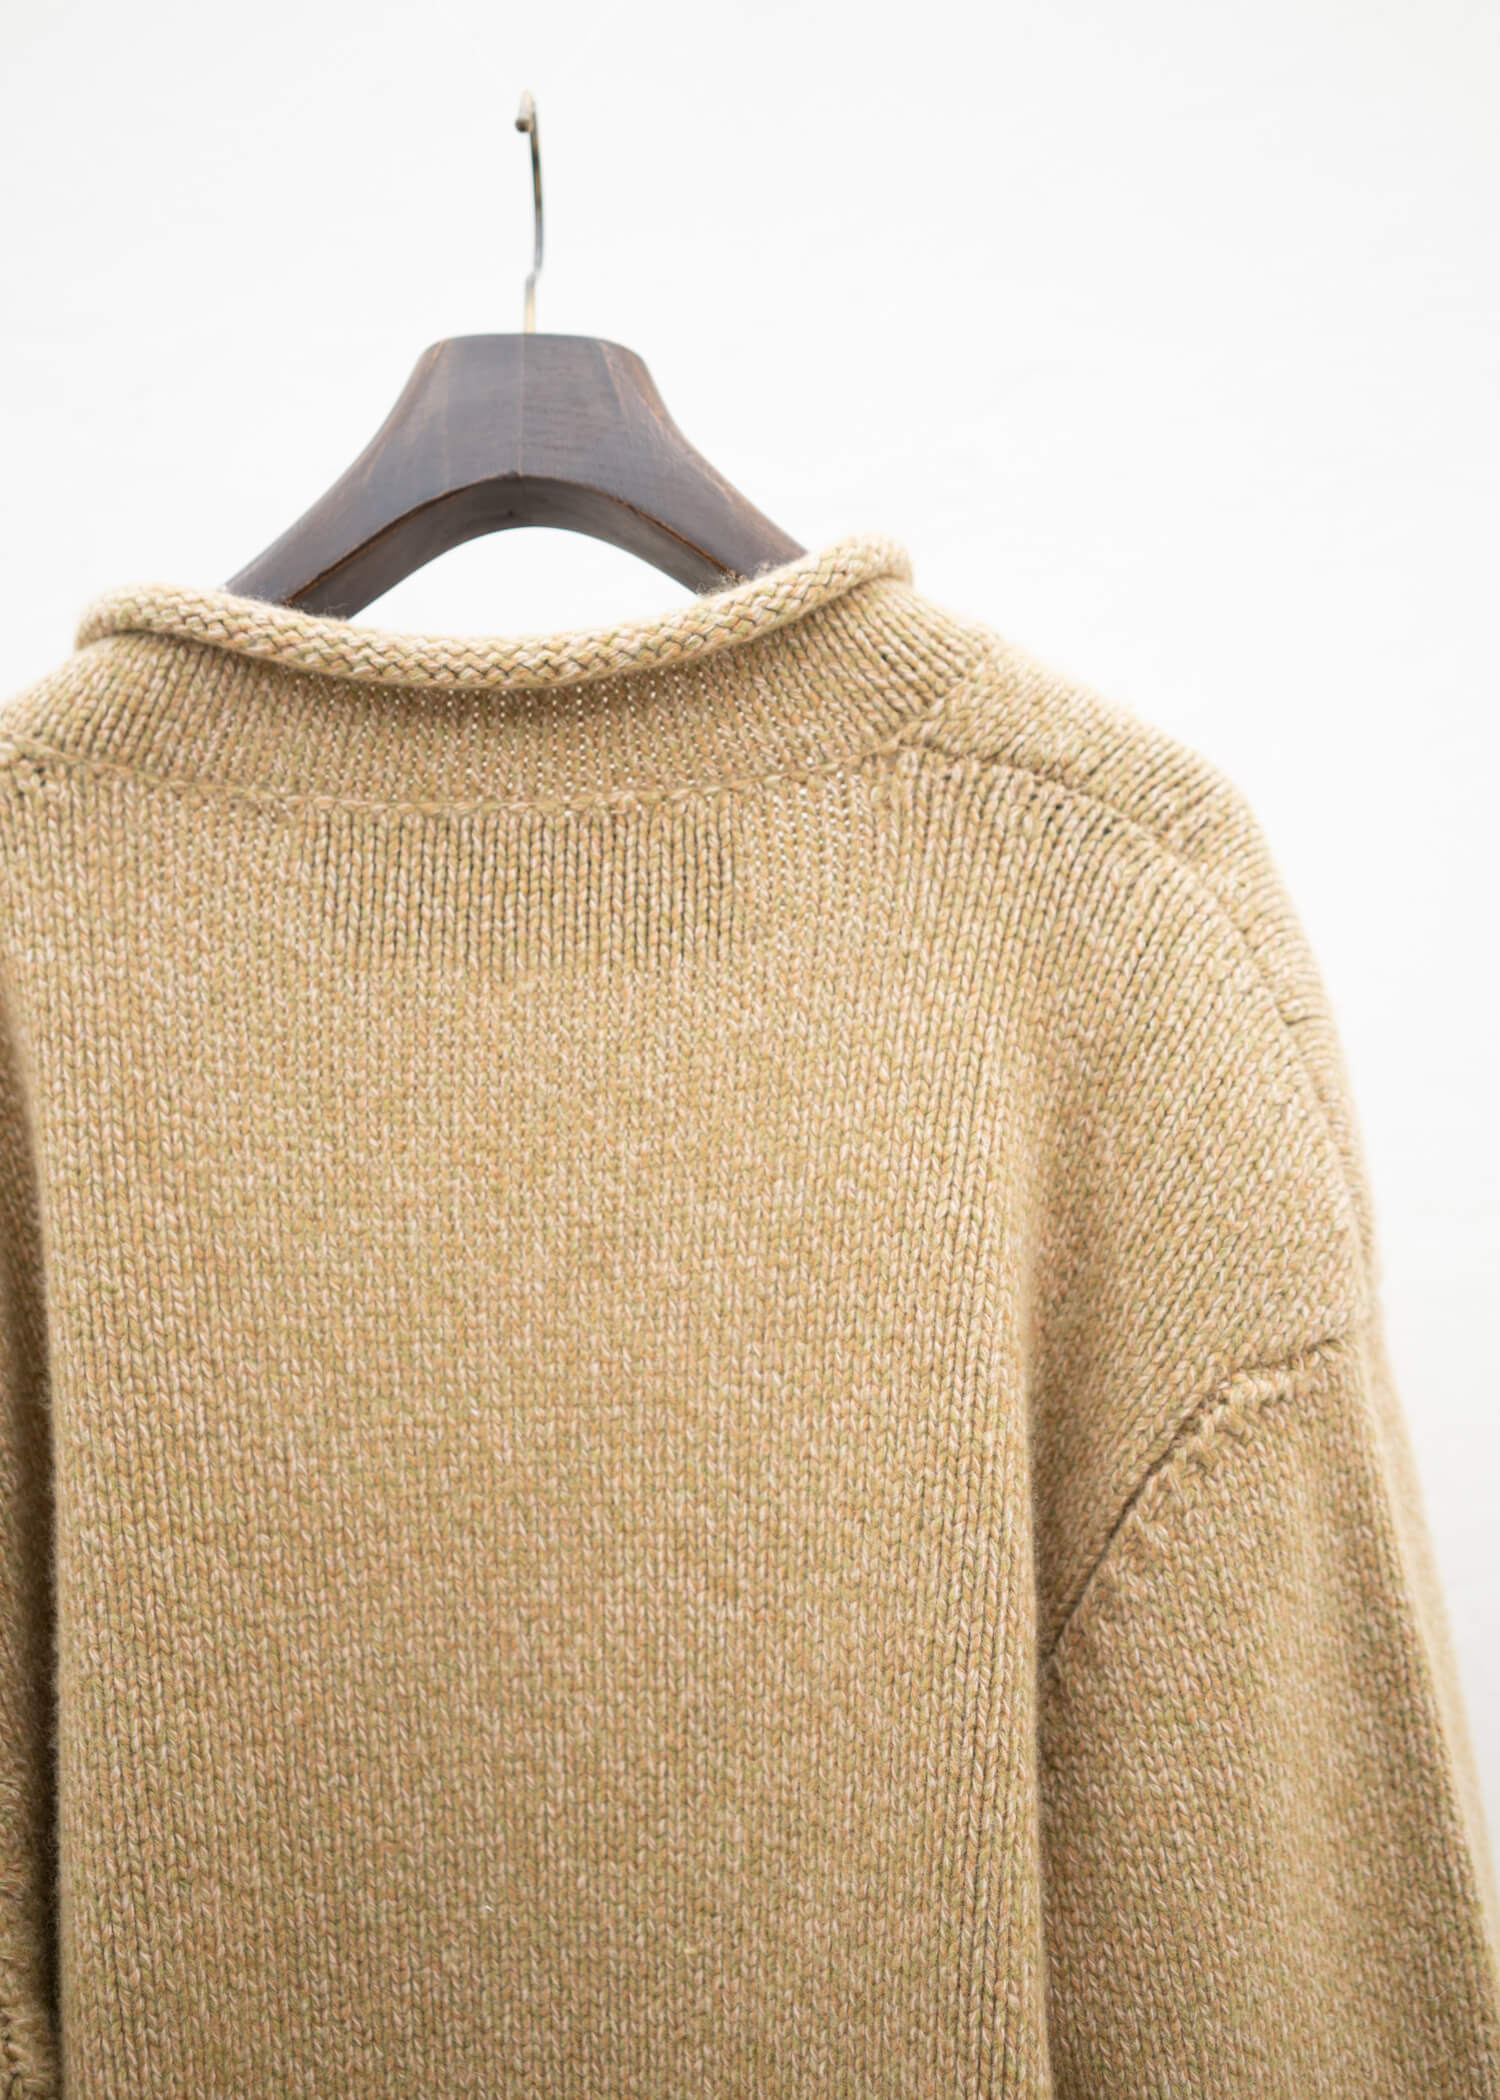 Survival Of The Fashionest Cashmere Cardigan